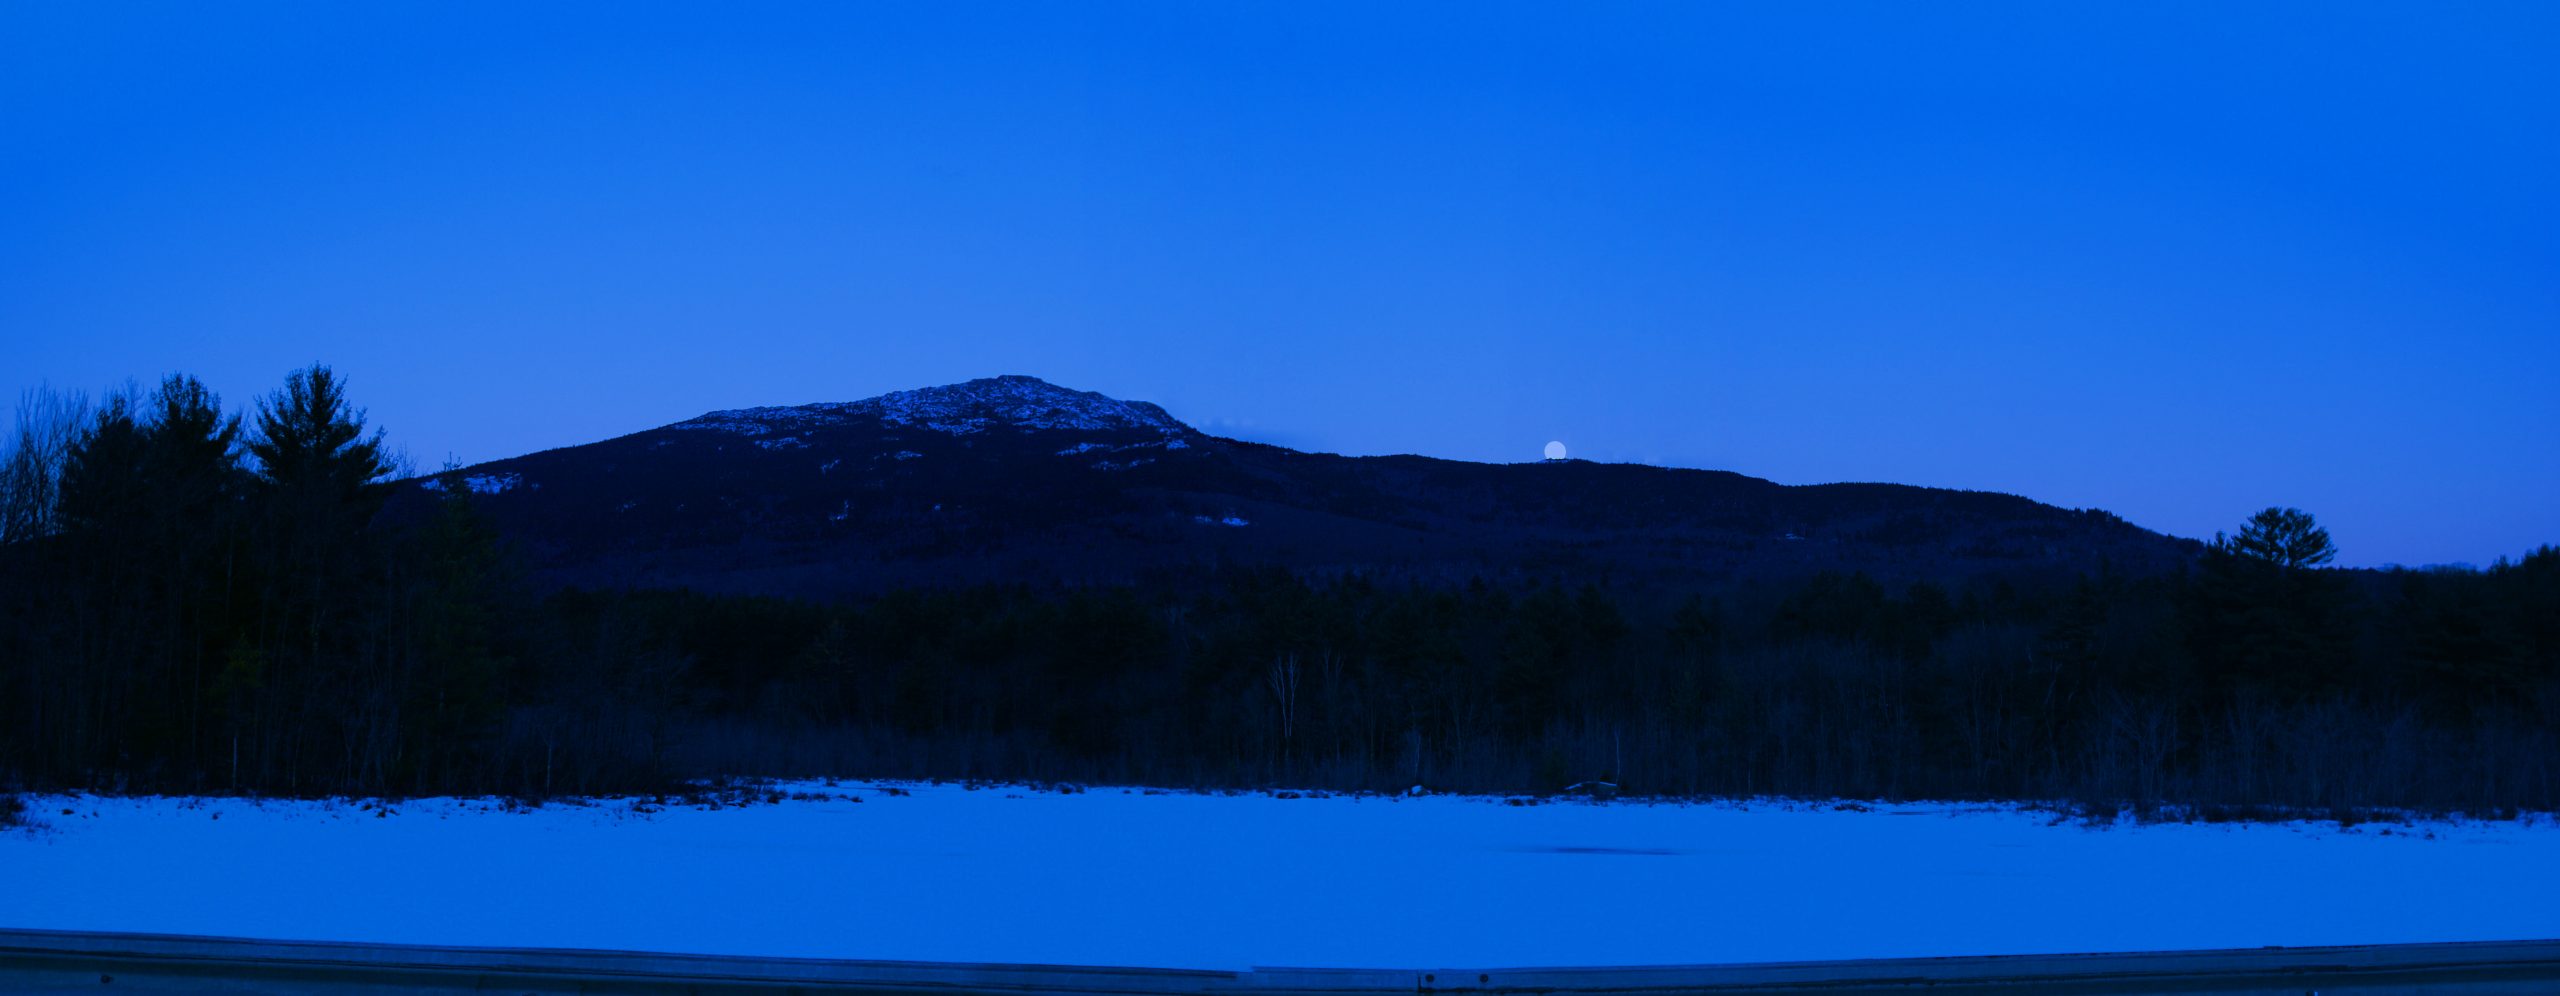 Moon over Mount Monadnock (user submitted)